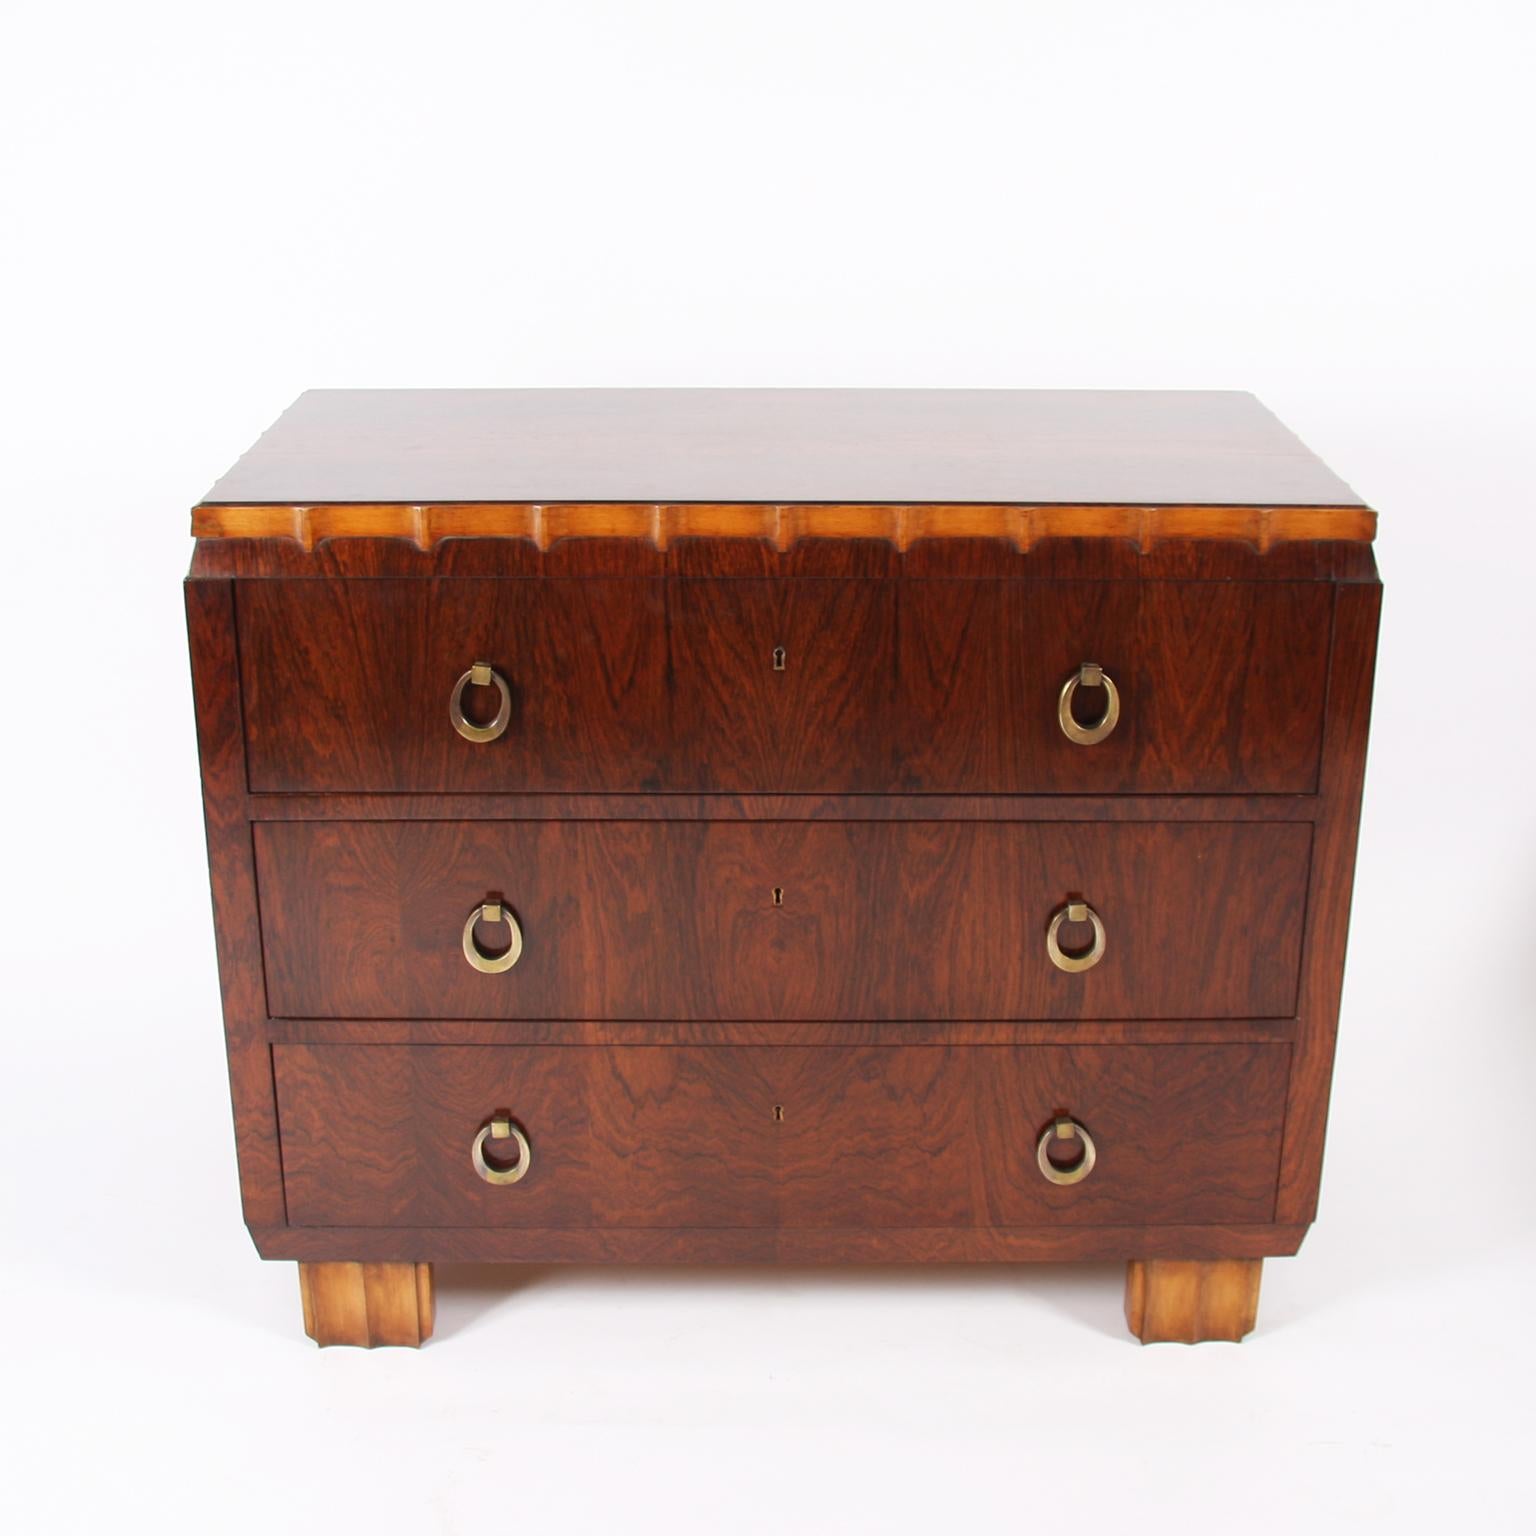 Belgian, circa 1920.

A unique hardwood chest of drawers, with beautiful brass handles. Golden detail to the top and feet.

In excellent condition.